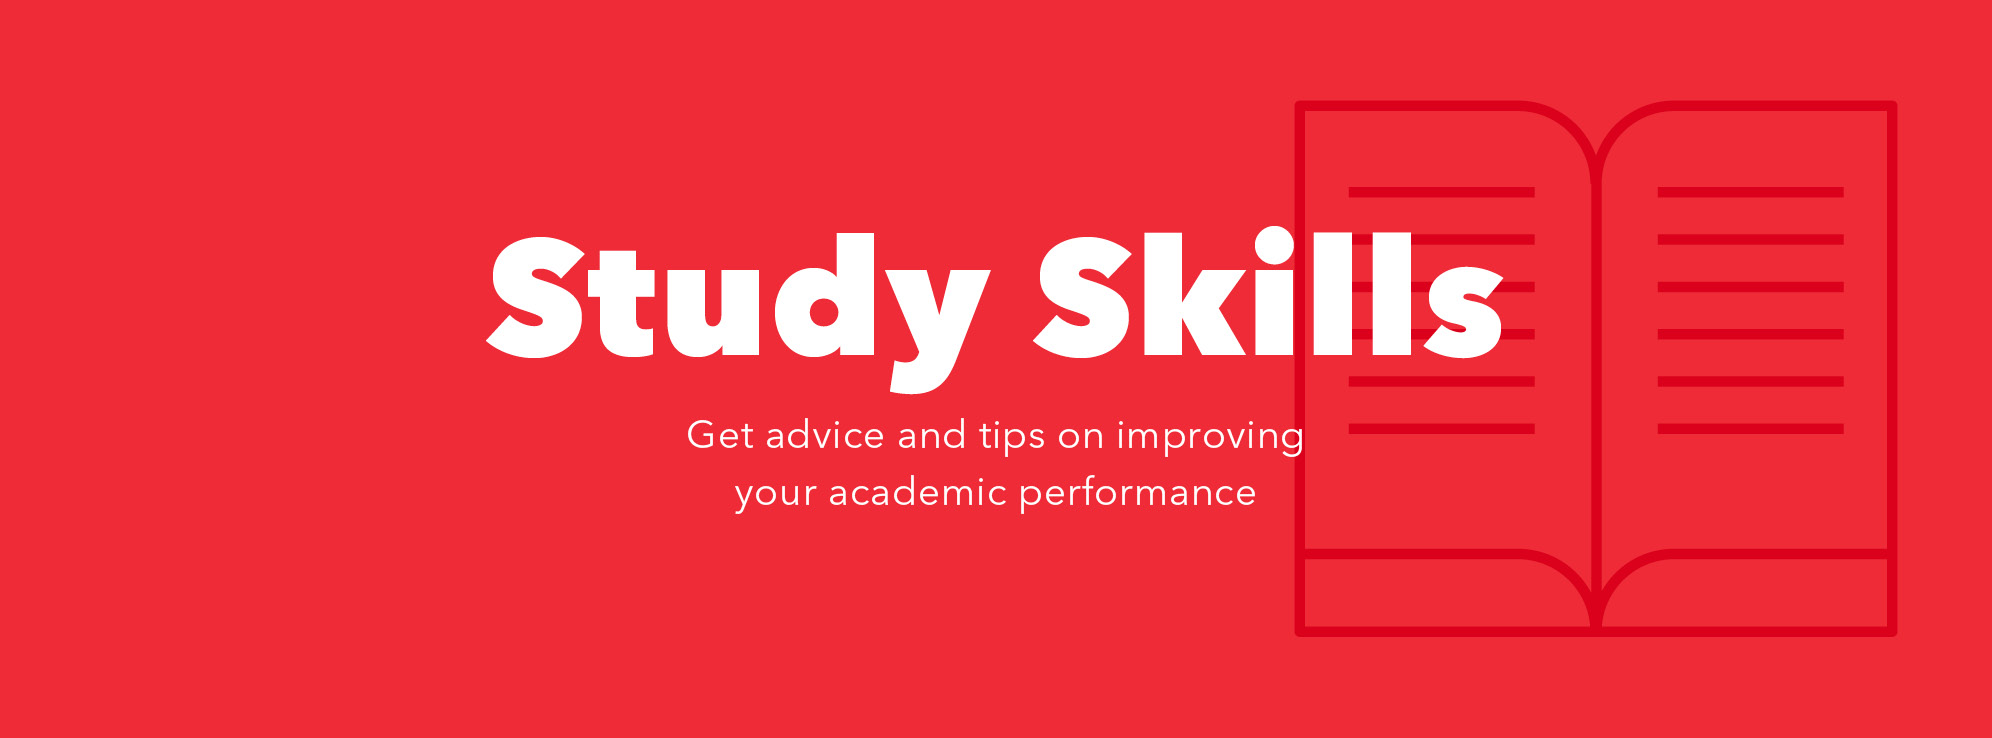 Study Skills - Get advice and Tips on improving your academic performance